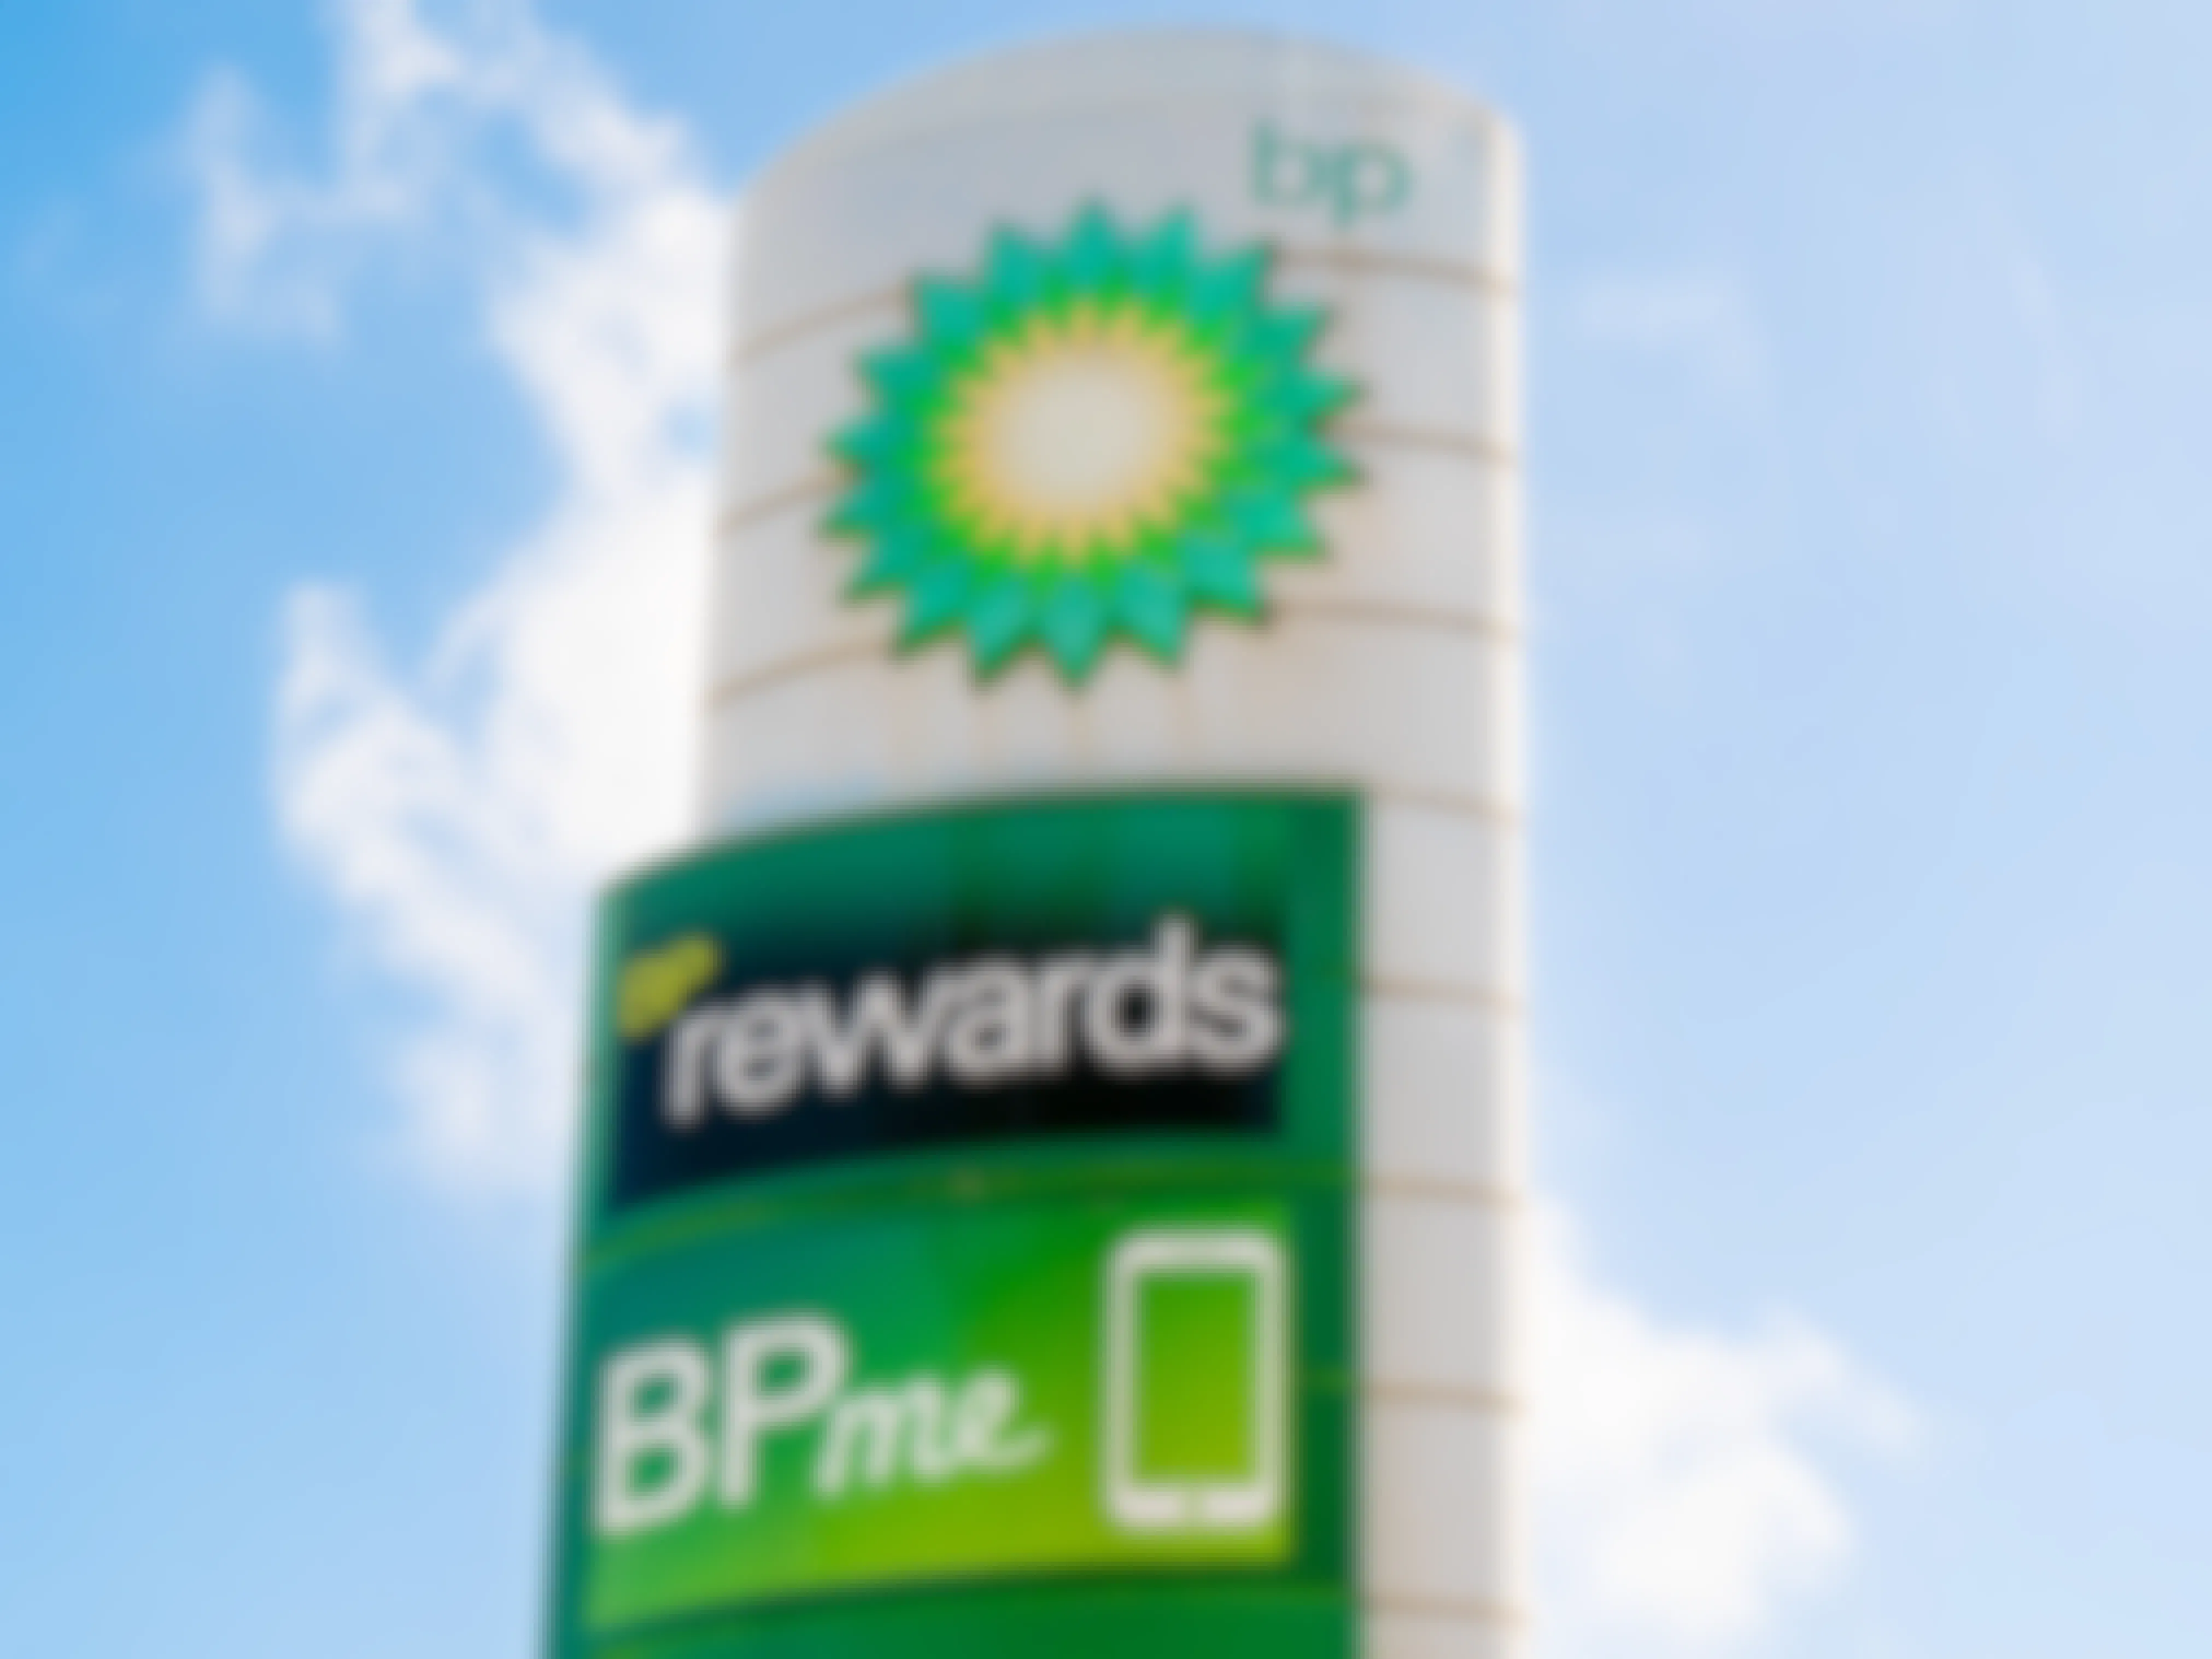 A sign next to a BP gas station advertising the BPme rewards app.